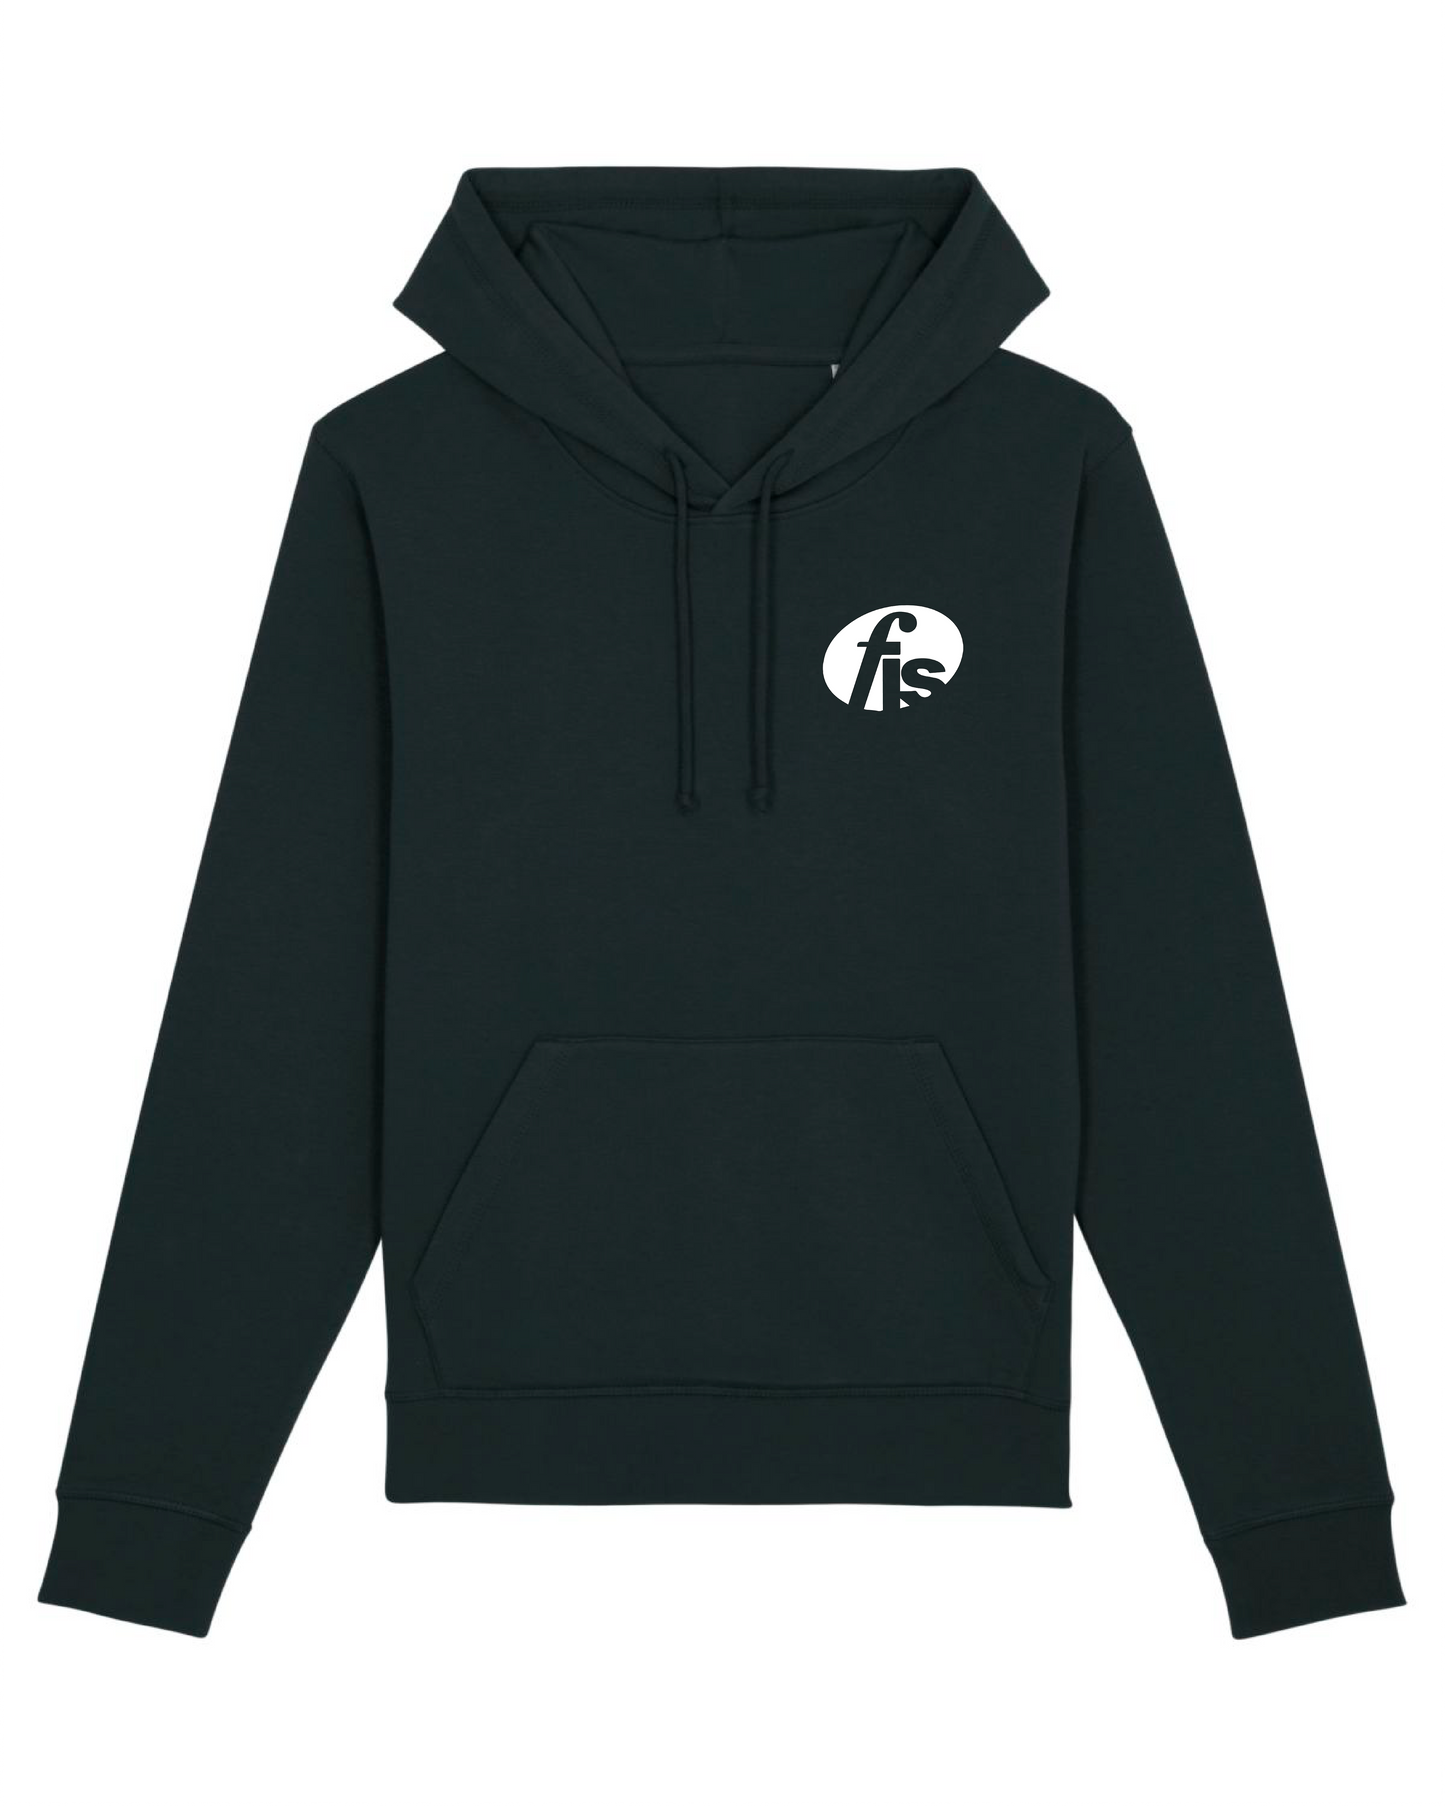 The VOLLEYBALL Hoodie